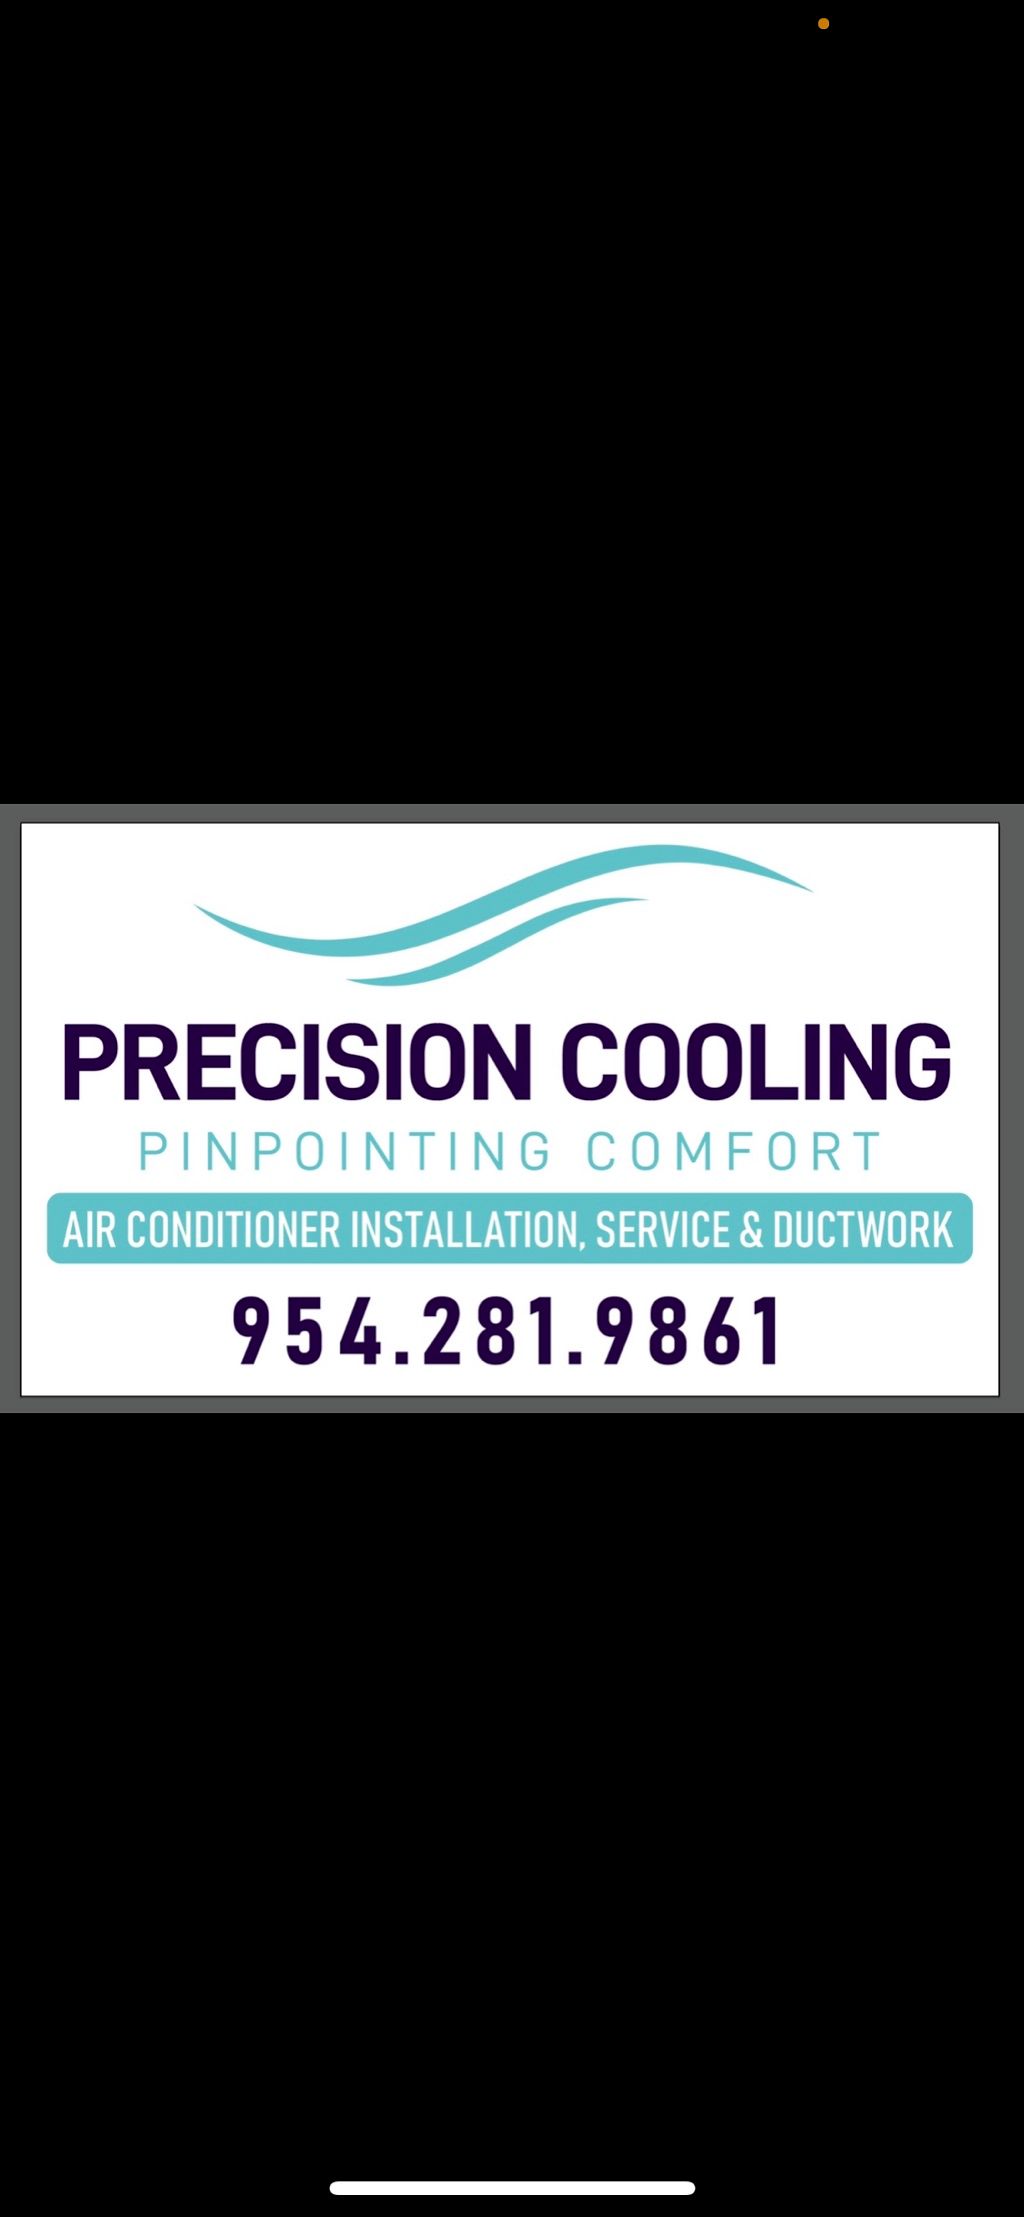 Precision Cooling